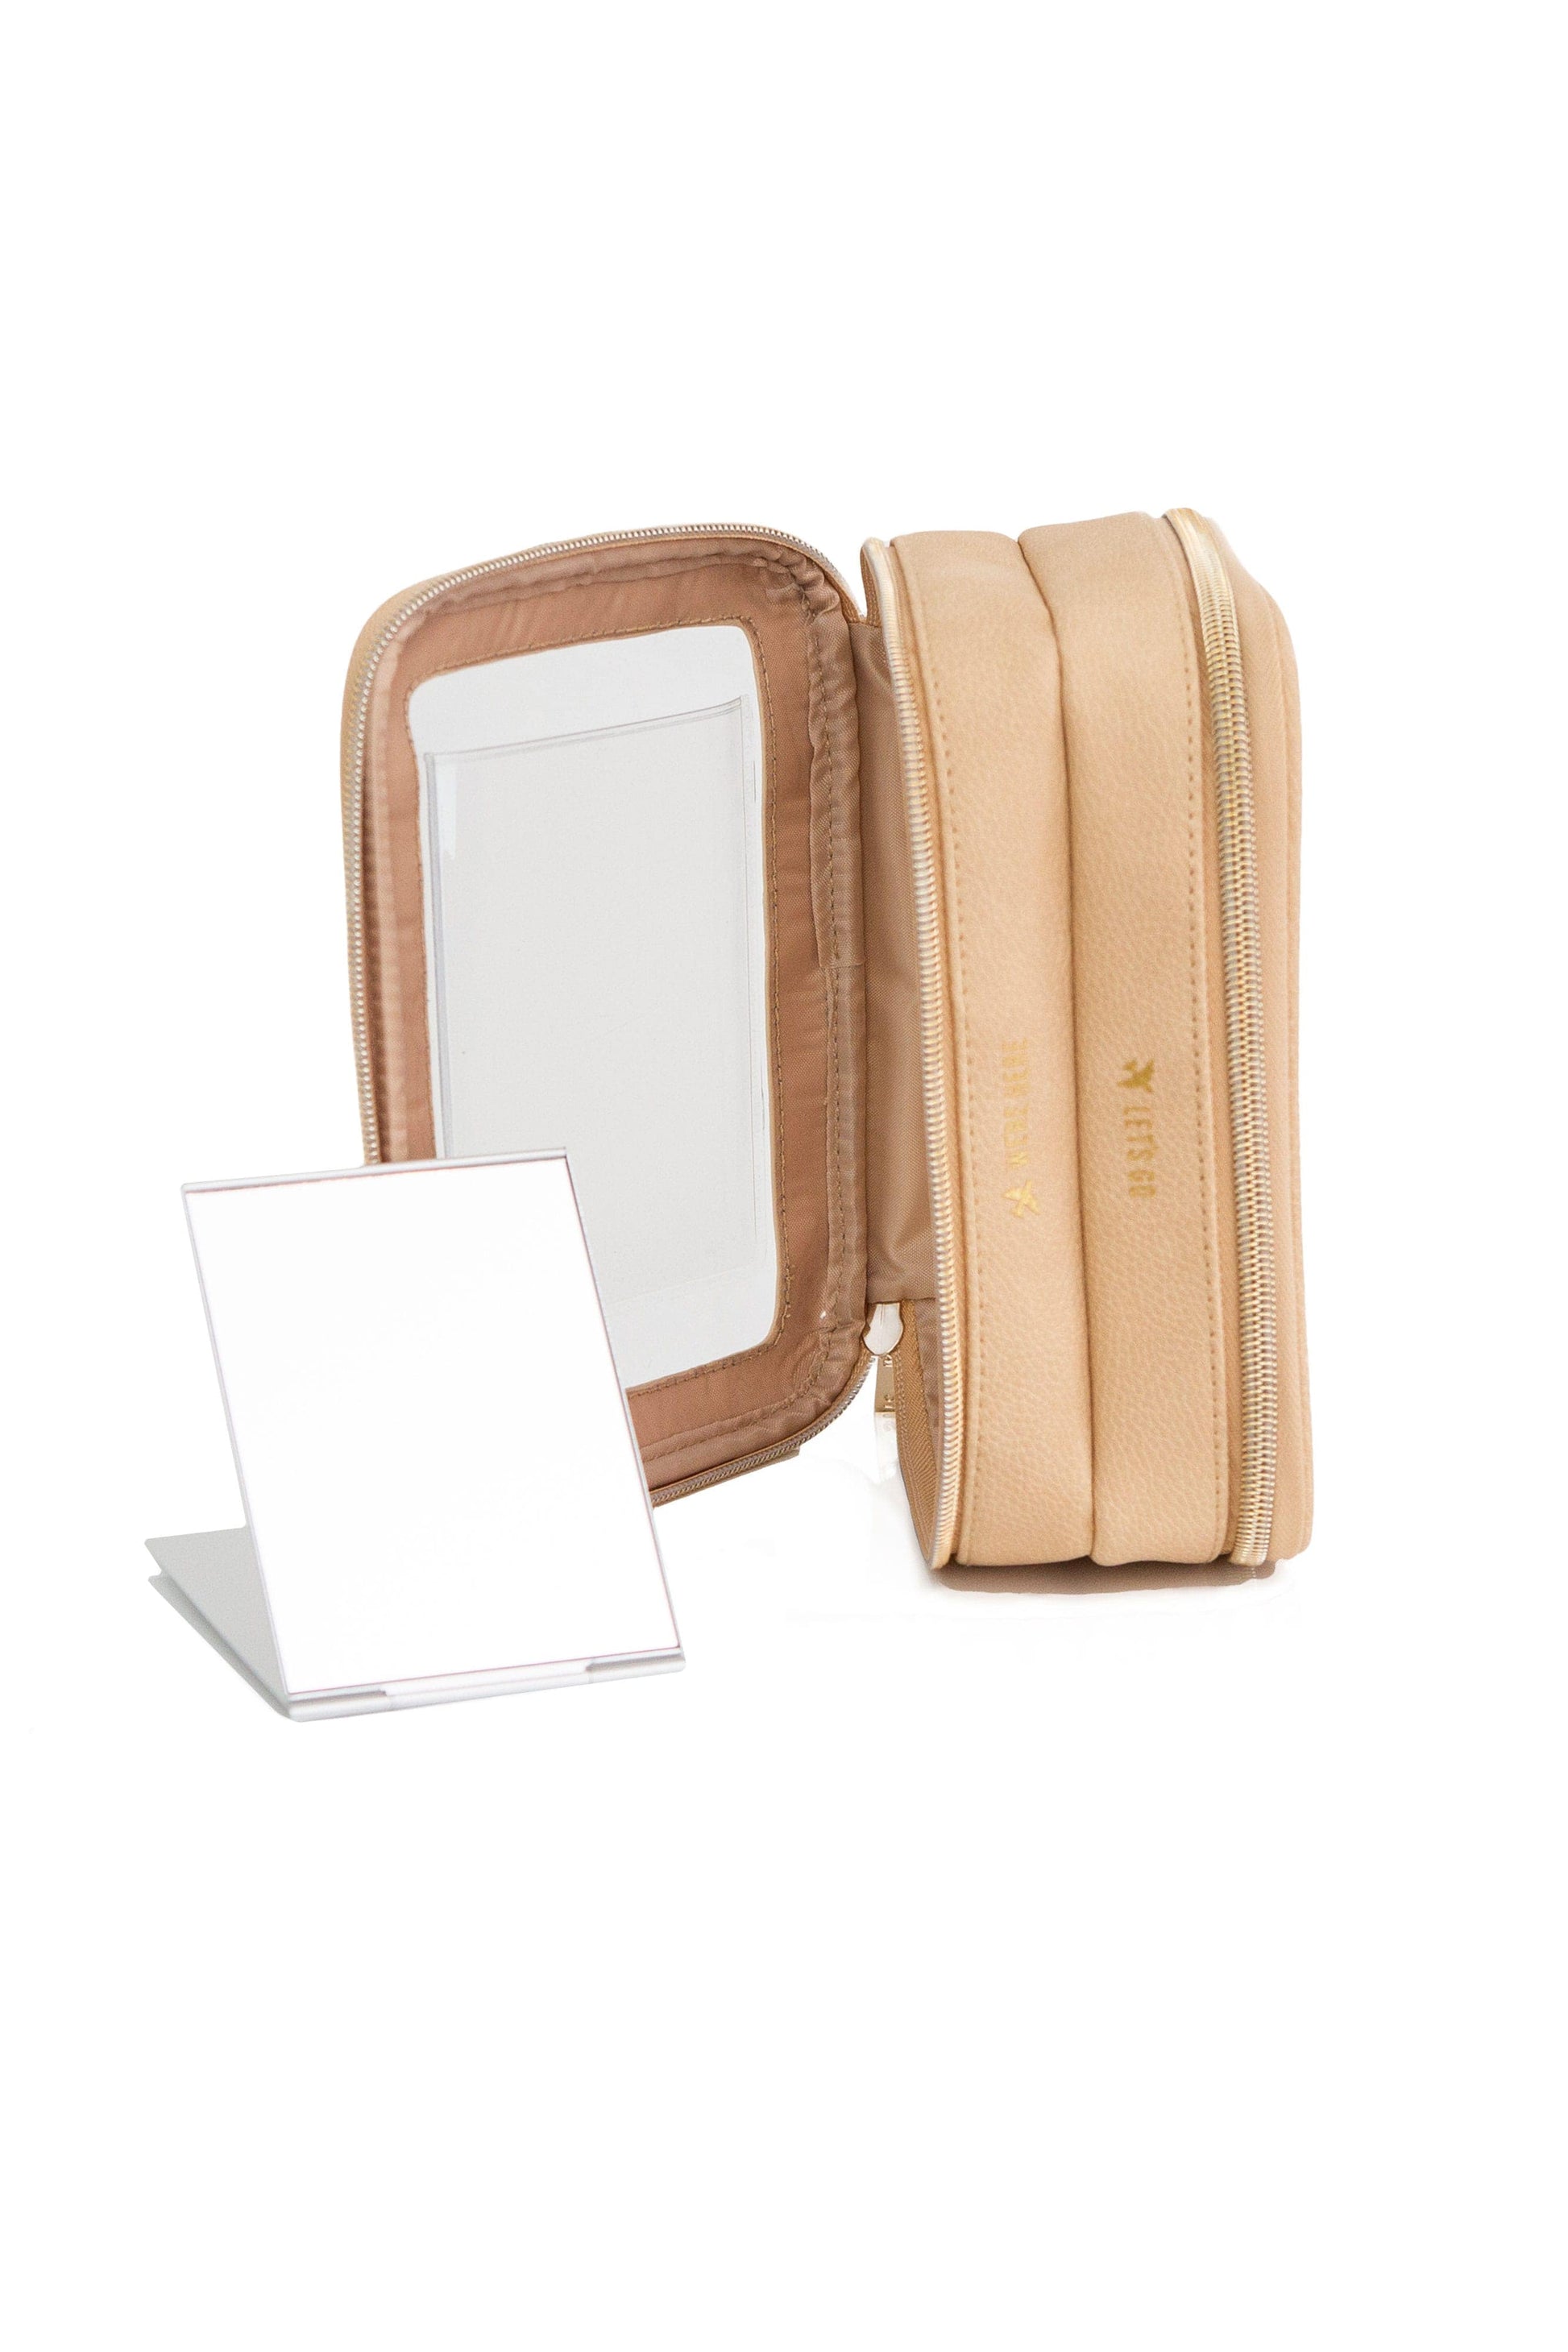 BEIS by Shay Mitchell | The On-The-Go Essential case in Beige (Product Image - interior with mirror)